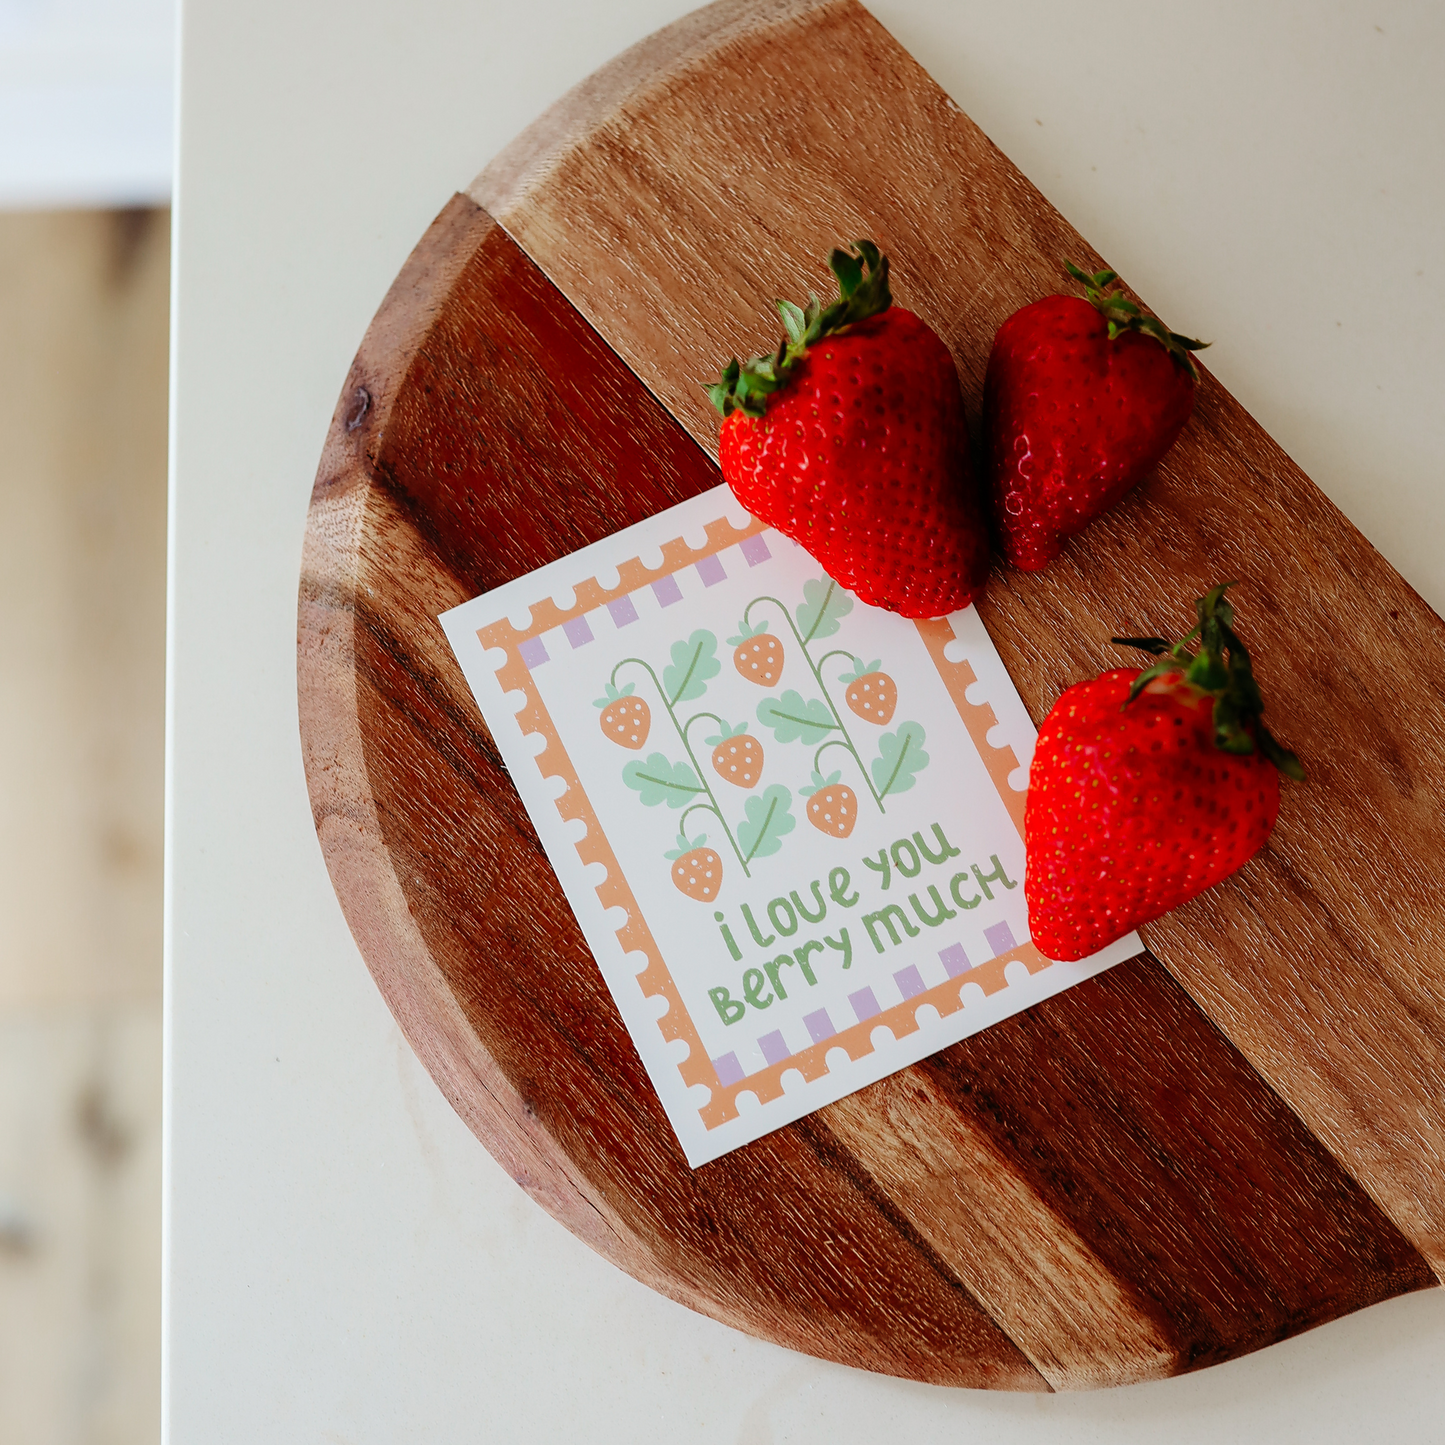 a lunchbox note with strawberries reads 'i love you berry much'. it's shown on a wood cutting board with strawberries.